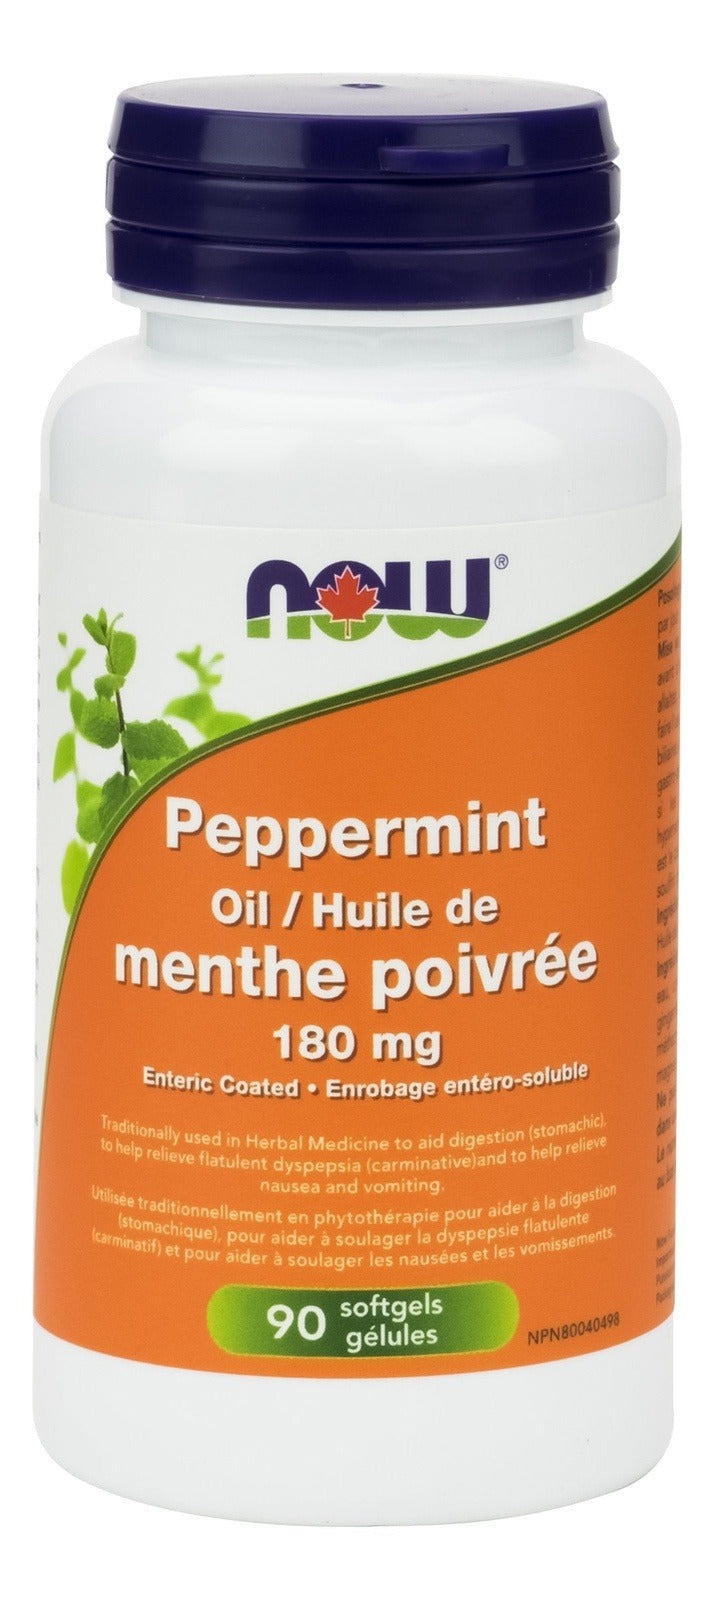 NOW Peppermint Oil 180 mg 90 Softgels Image 1